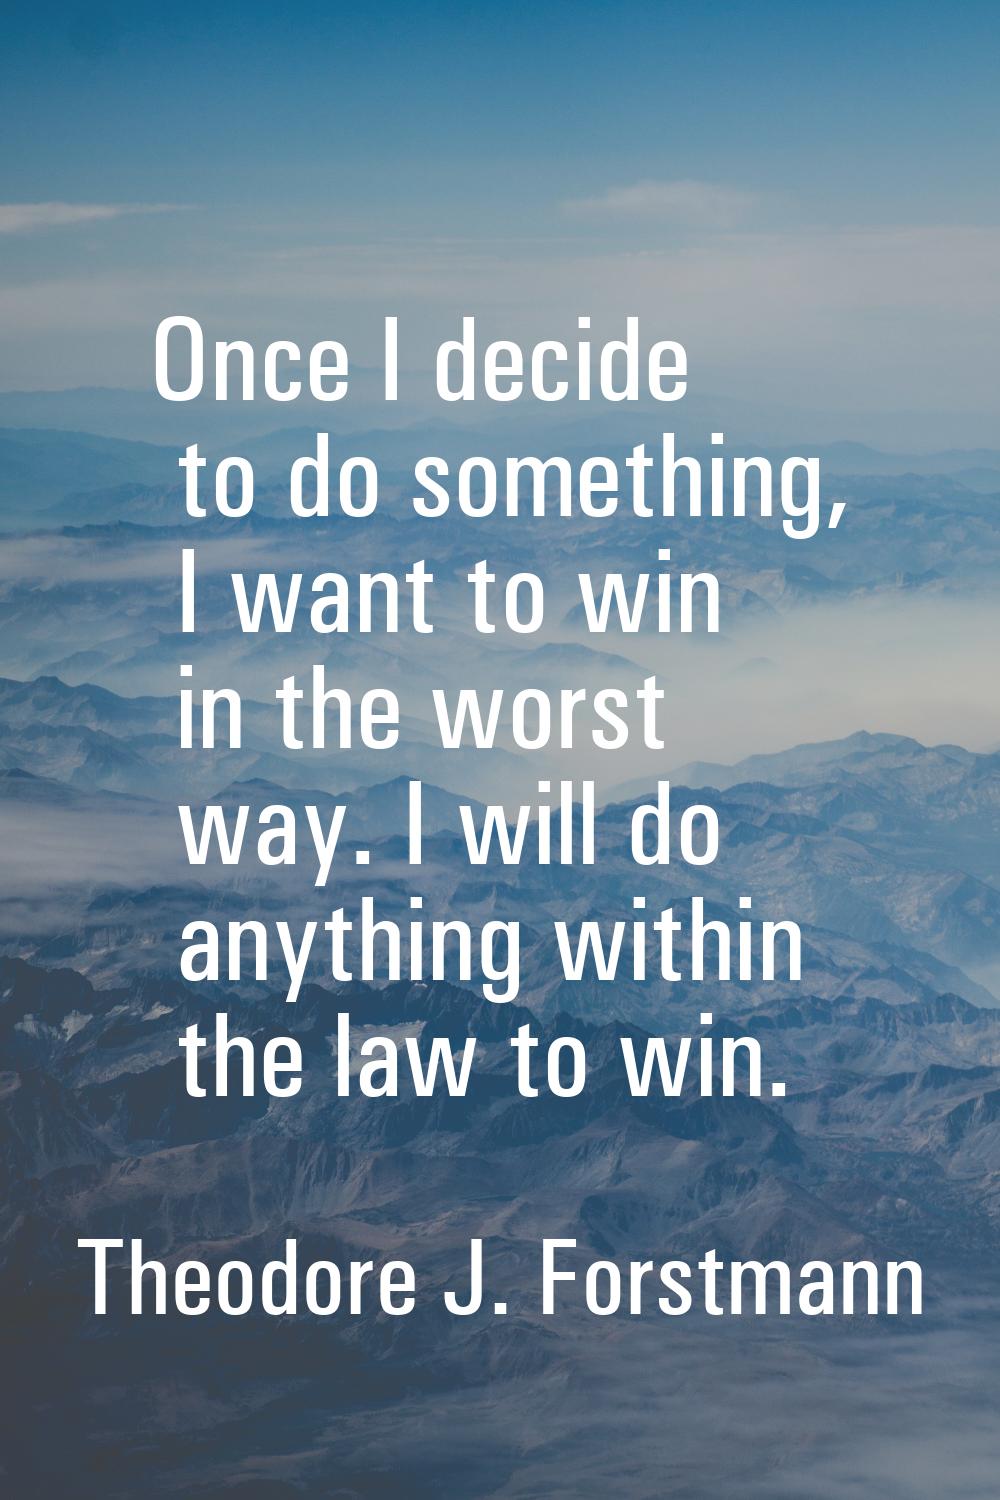 Once I decide to do something, I want to win in the worst way. I will do anything within the law to